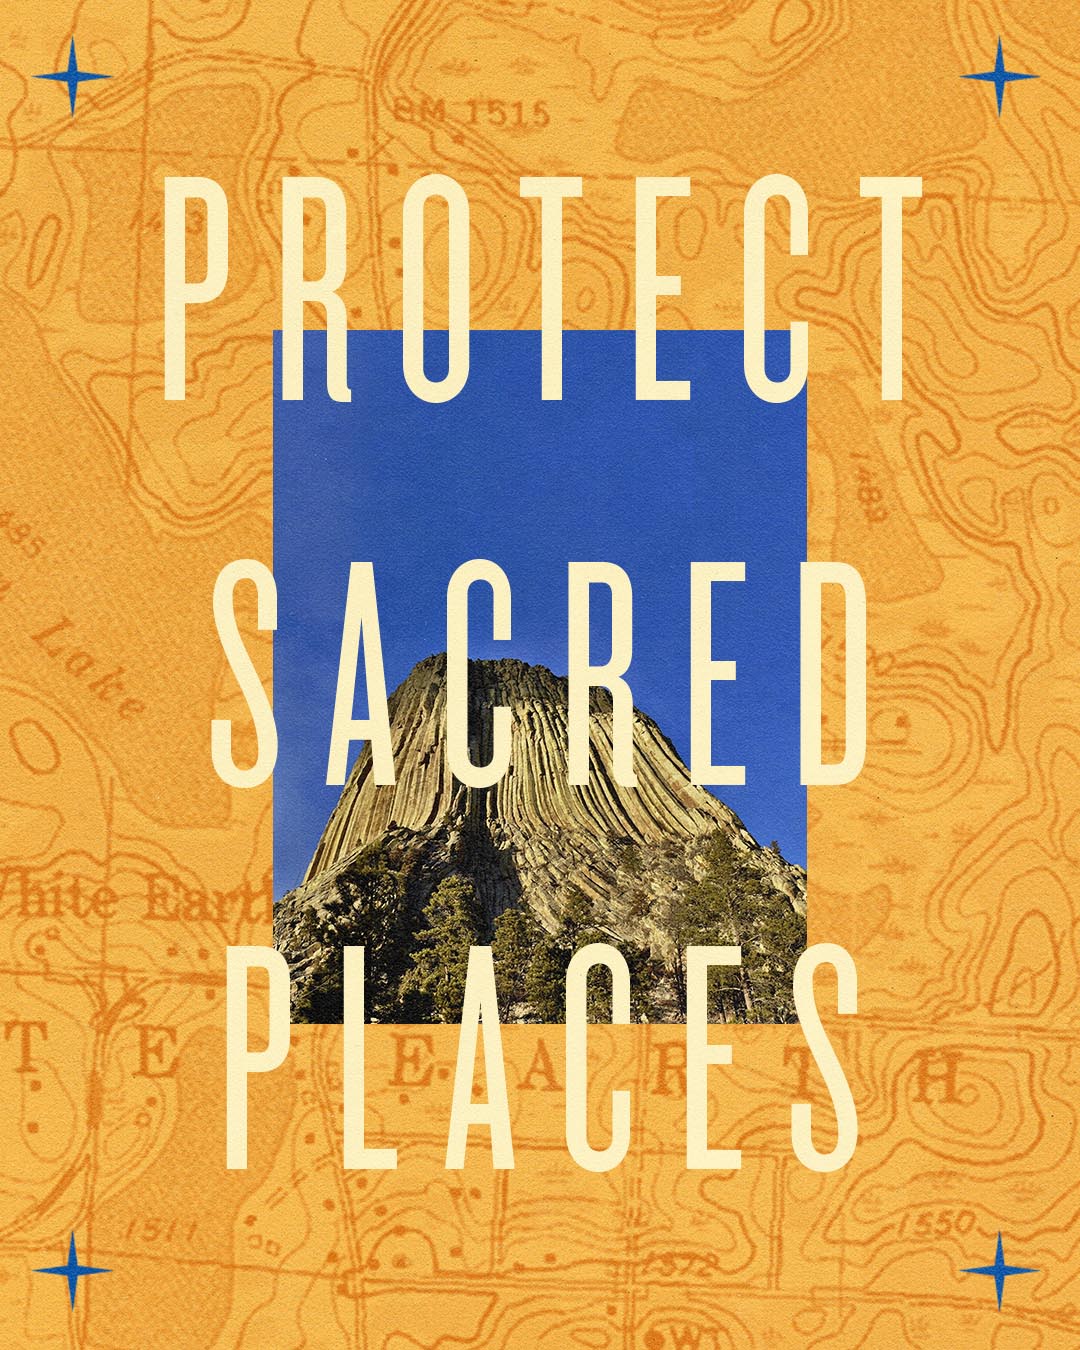 Protect Sacred spaces